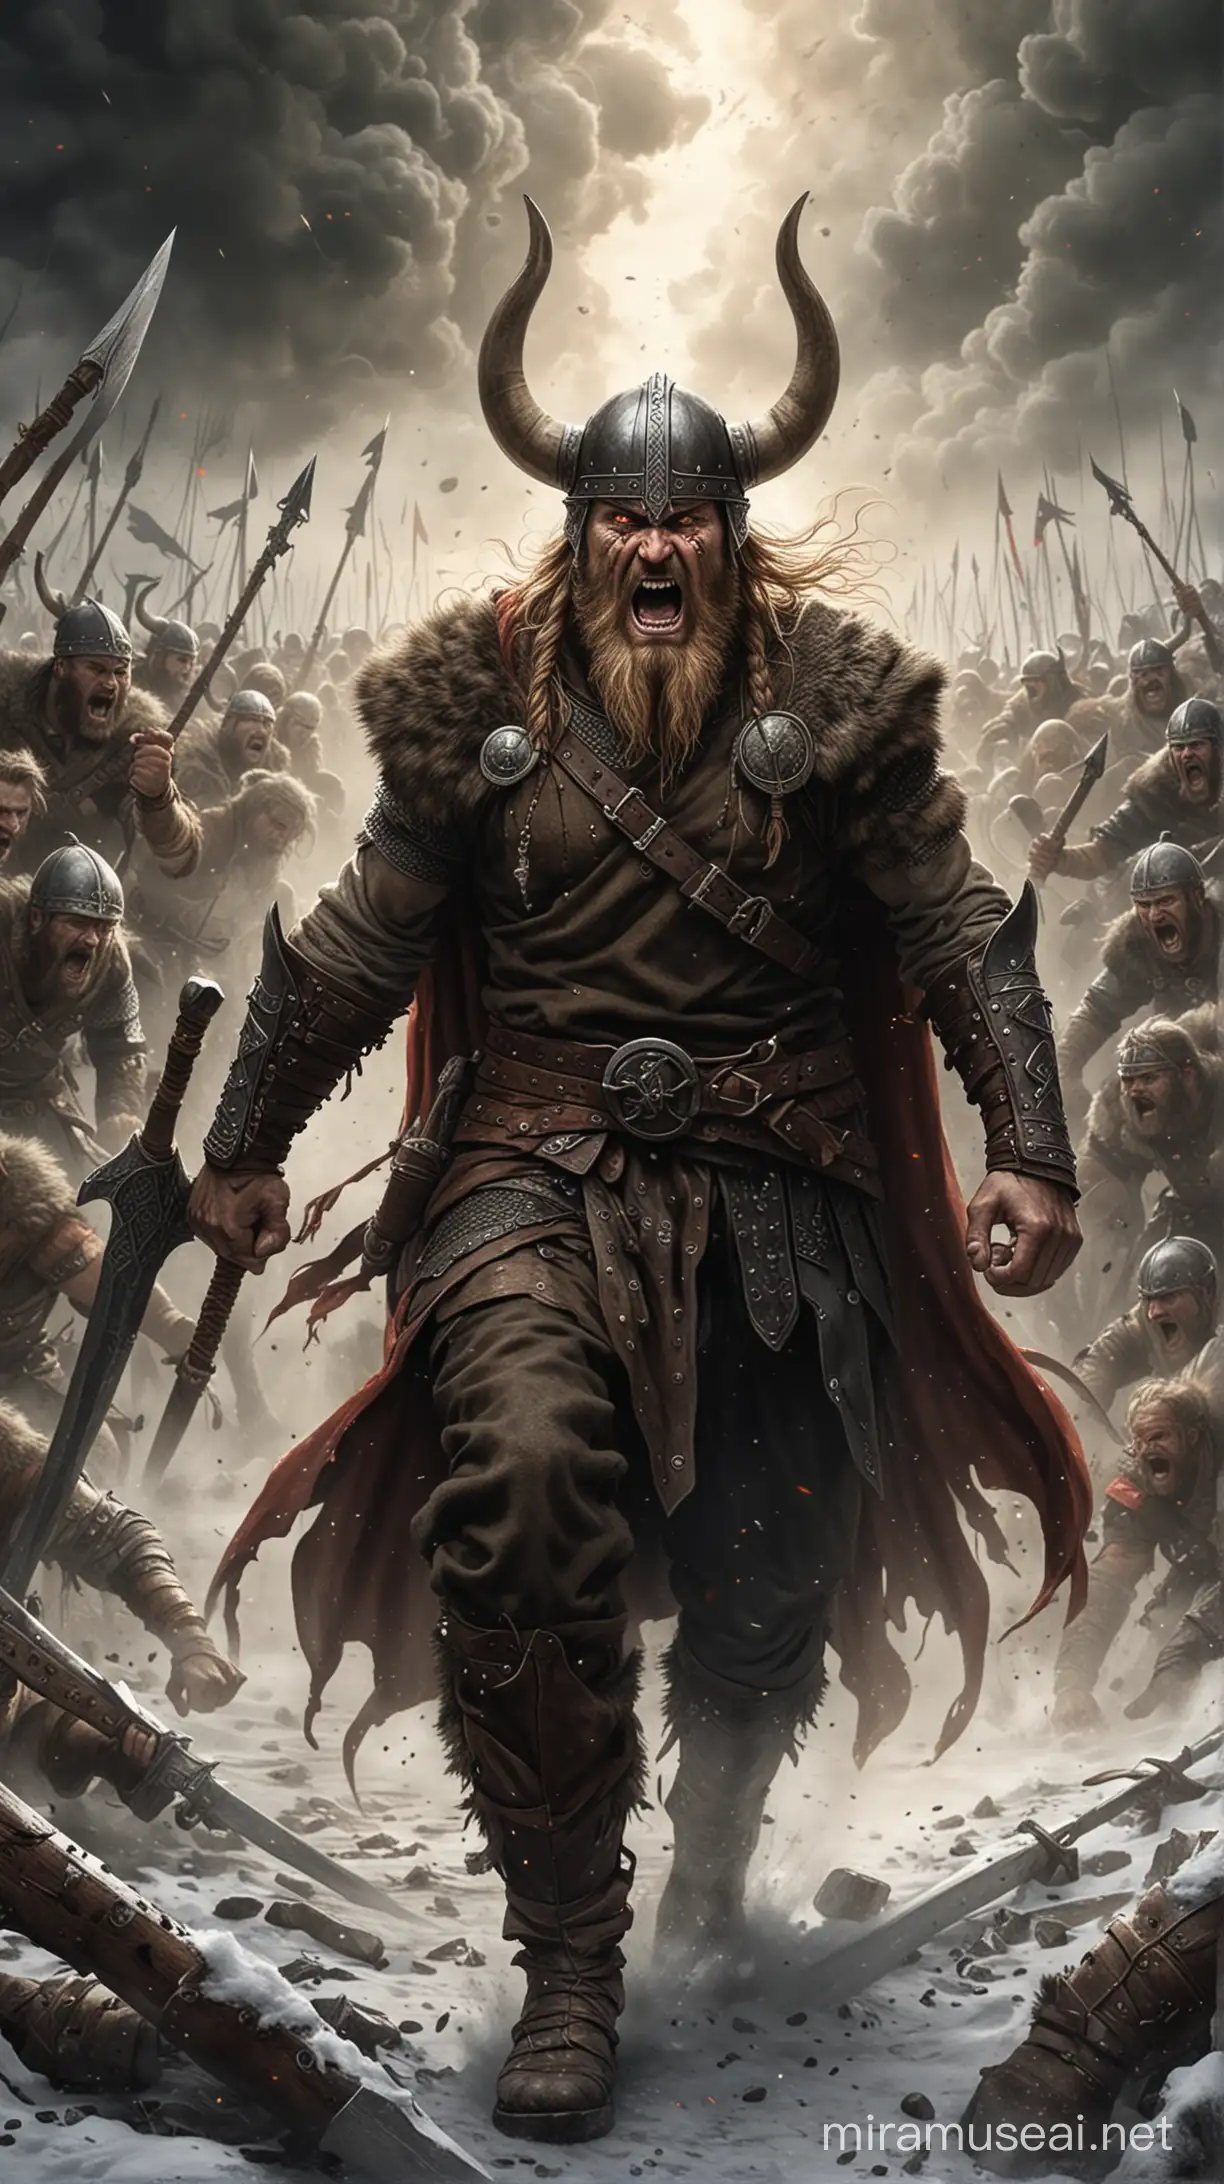 A drawing depicting a Viking warrior entering a "berserk" trance-like state before battle: The Viking warrior is depicted with a fierce look, eyes gleaming with rage, and transformed in preparation for battle. In the background, there is an atmosphere of excitement as warriors eagerly await the impending conflict.

